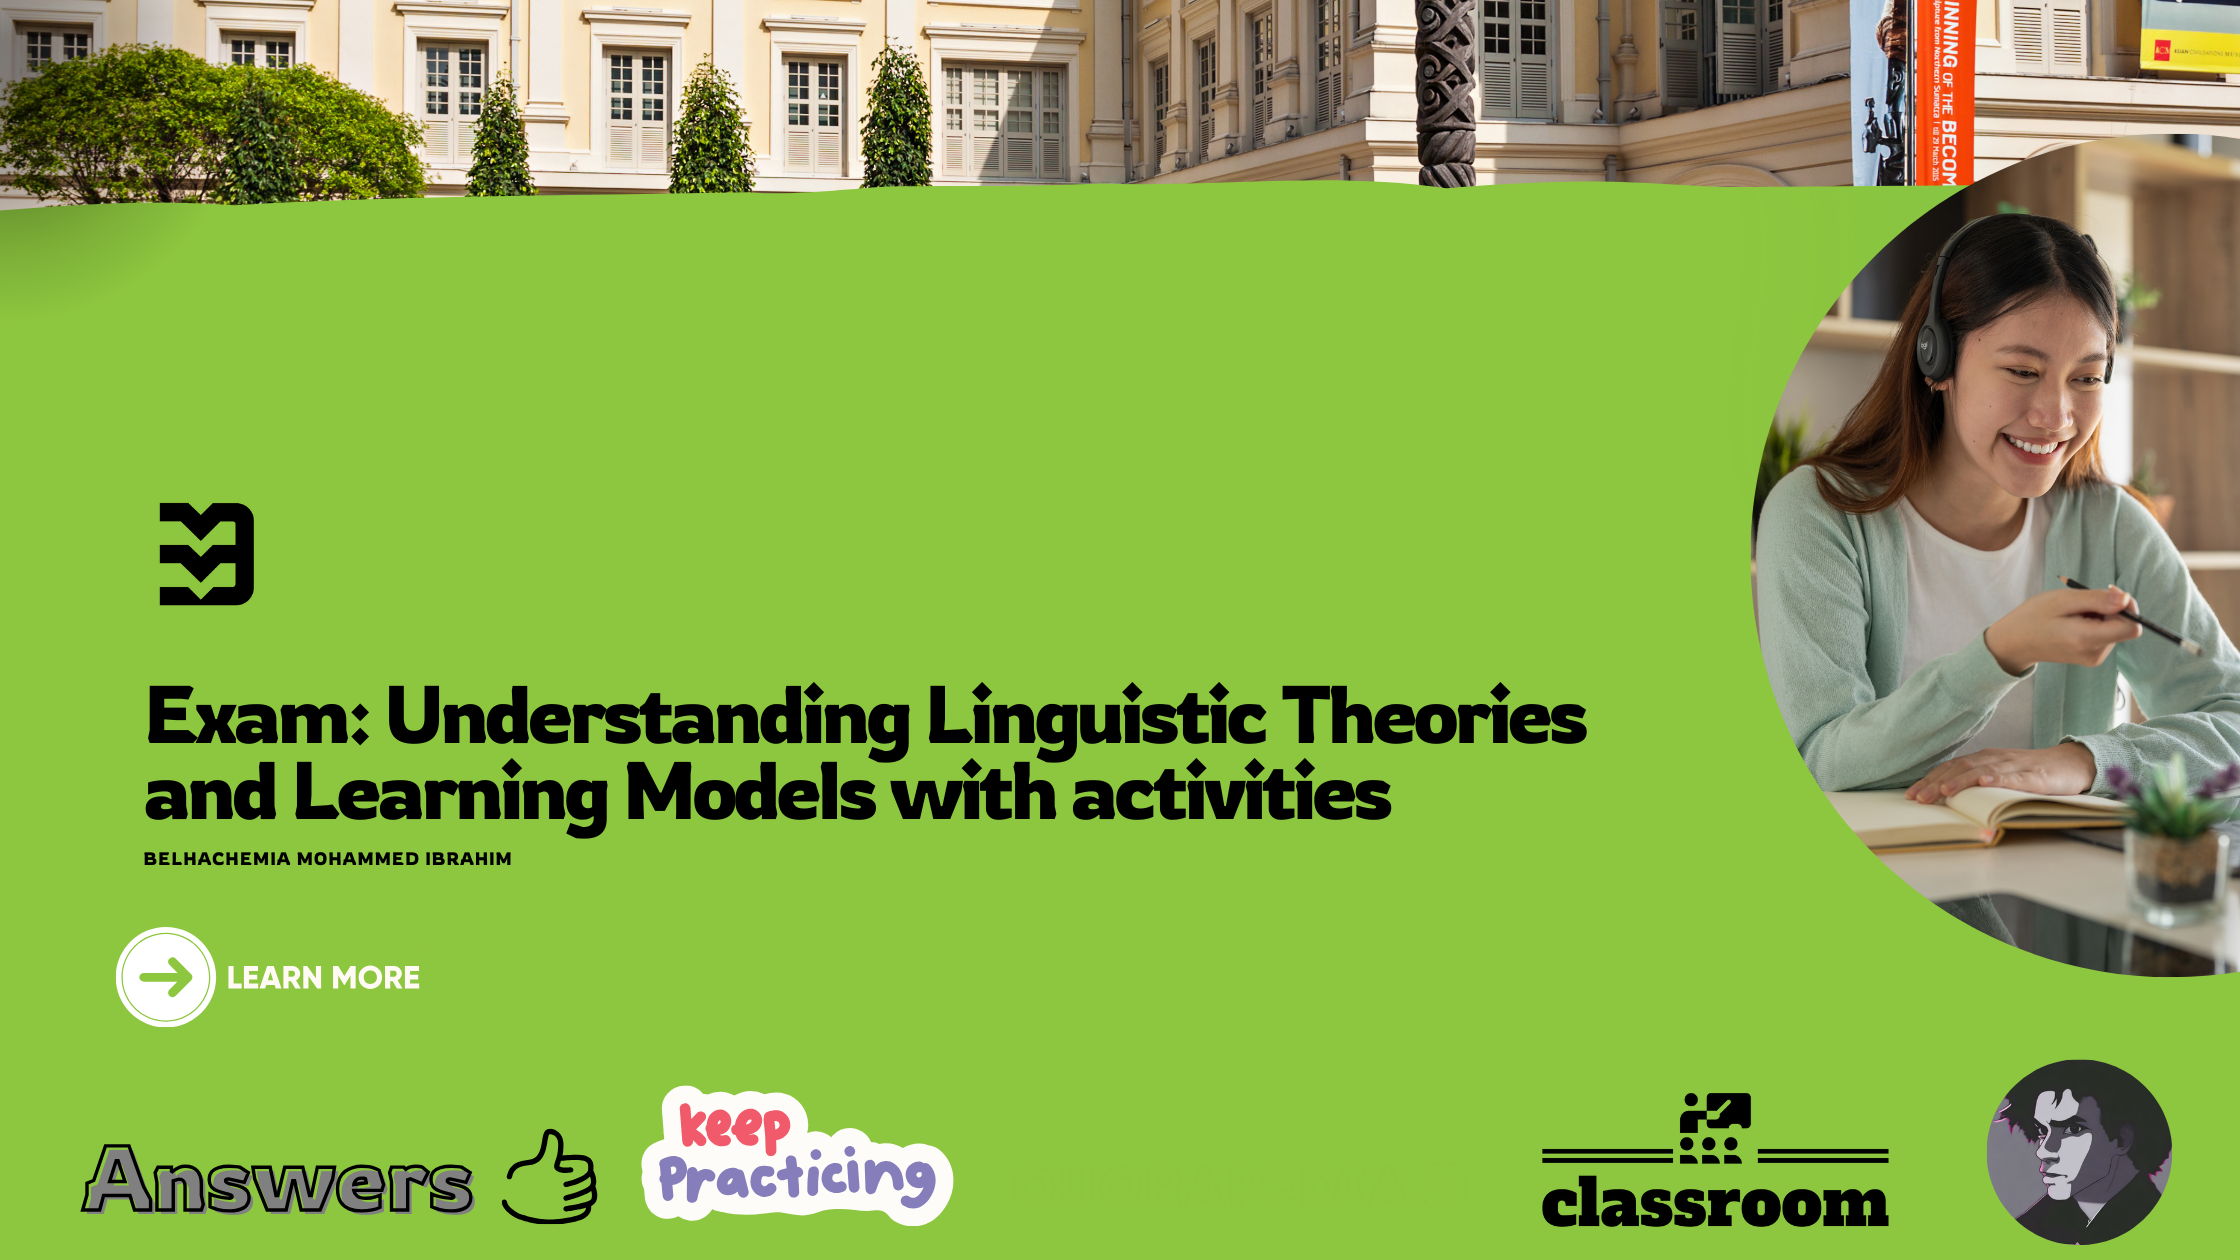 Exam: Understanding Linguistic Theories and Learning Models with activities